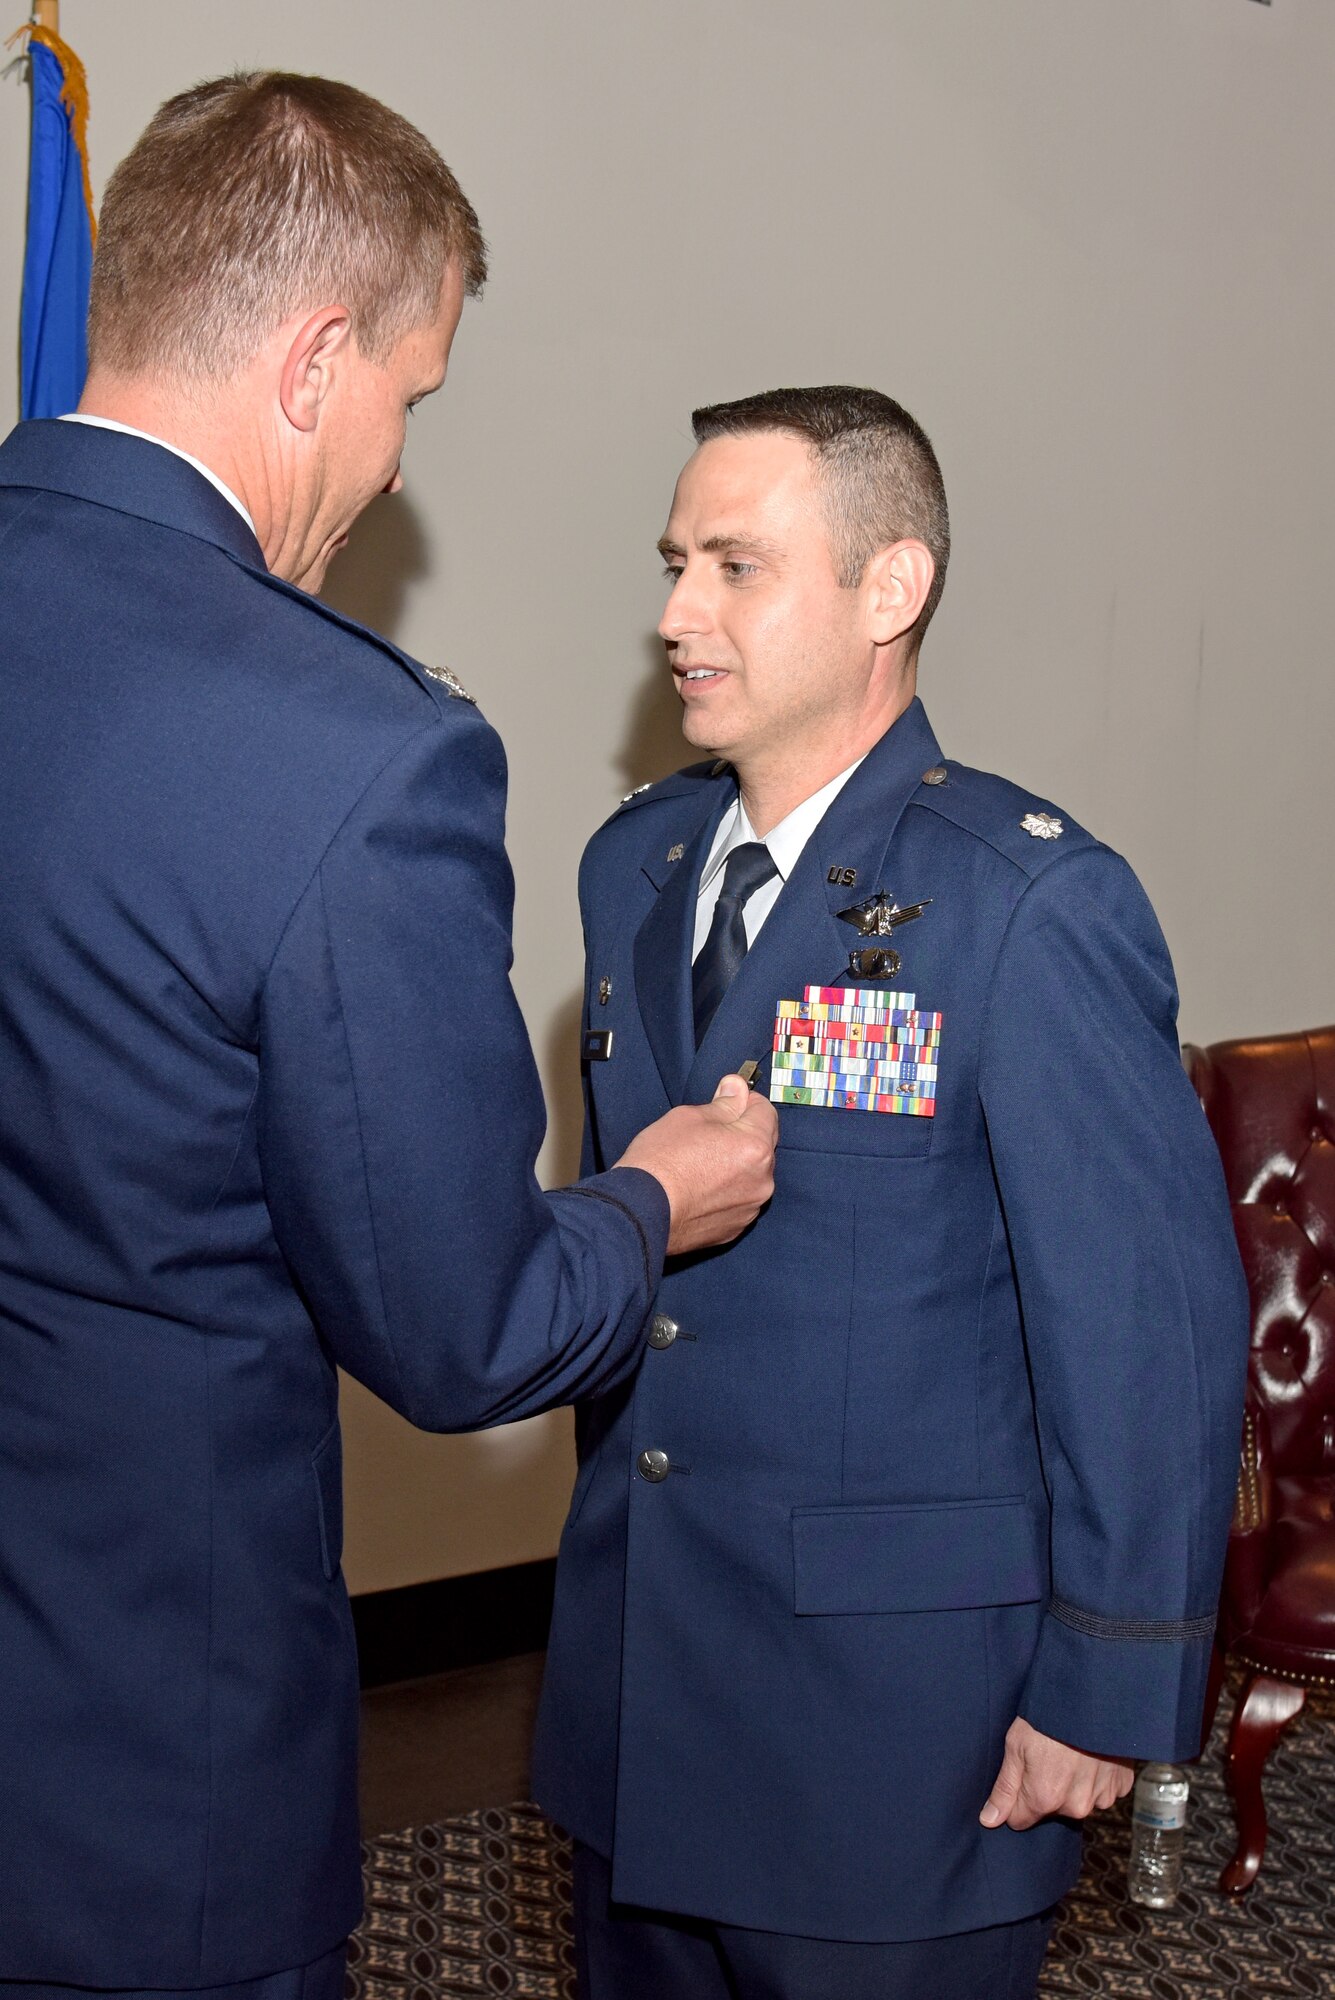 U.S. Air Force Lt. Col. Edward Harris, 17th Comptroller Squadron Commander, stands at attention as Col. Jeffery Sorrell, 17th Training Wing Vice Commander, pins on a Meritorious Service medal during the 17th CPTS Change of Command ceremony at the Event Center on Goodfellow Air Force Base, Texas, June 2, 2017. Harris received the medal for outstanding service to the wing. (U.S. Air Force photo by Staff Sgt. Joshua Edwards/Released)